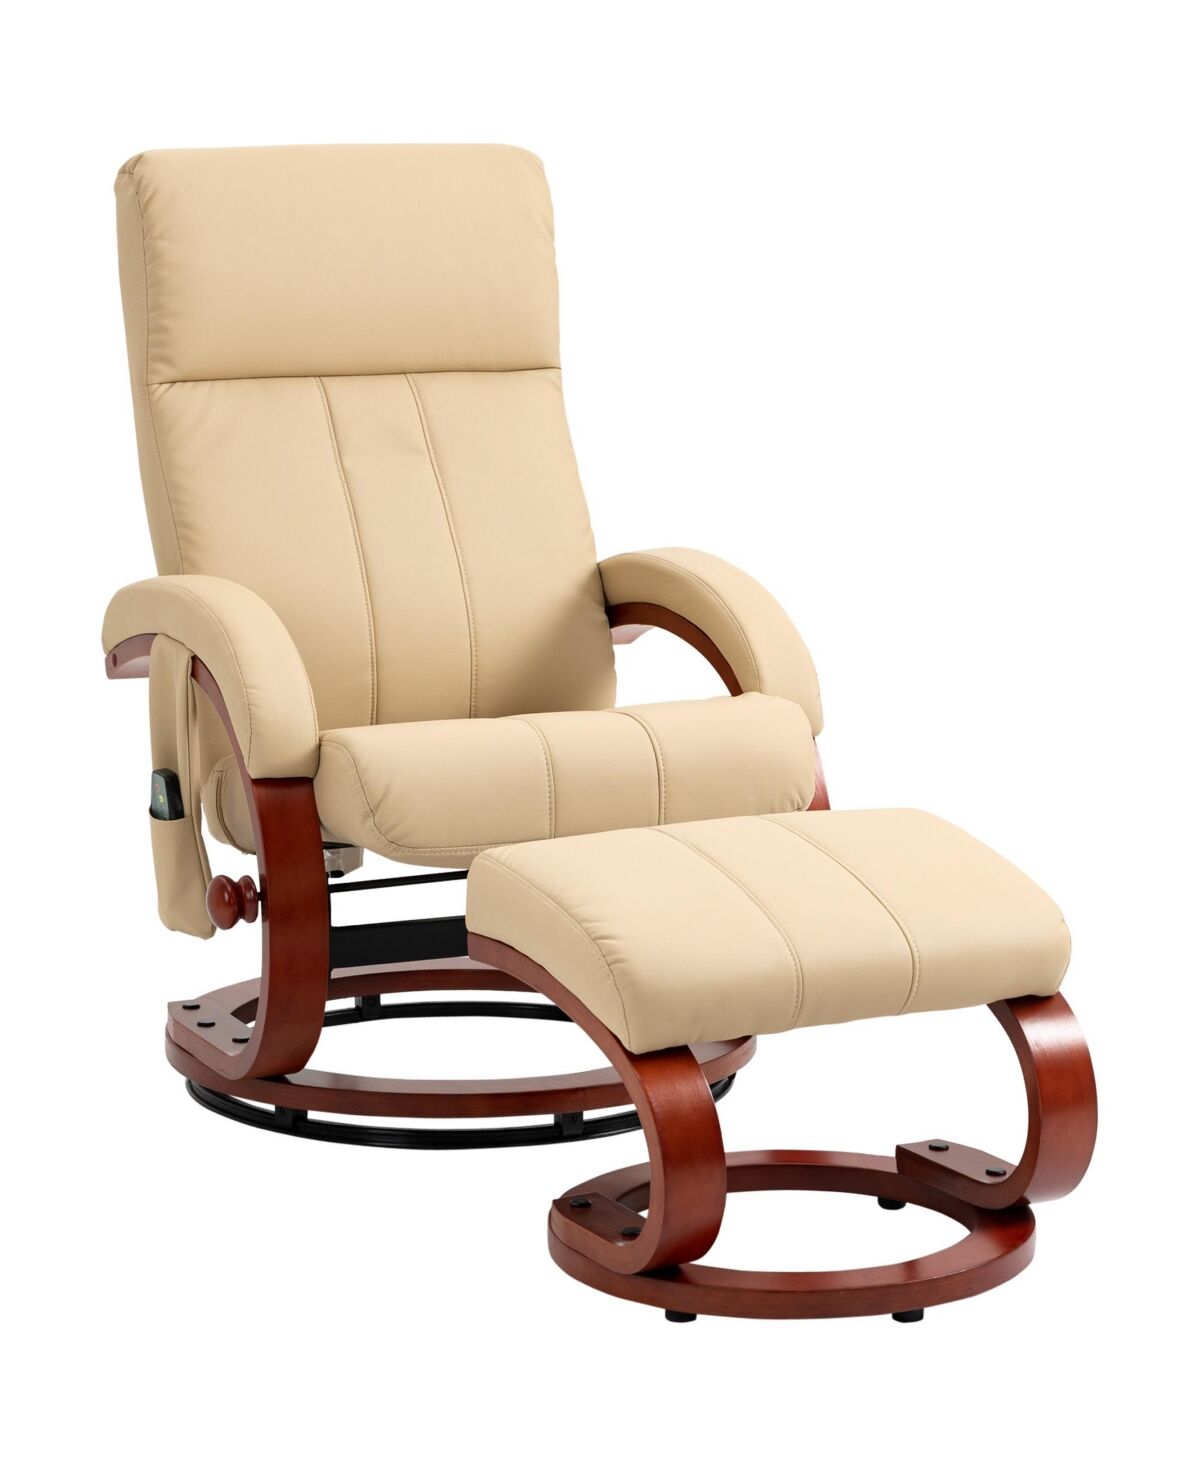 Homcom Recliner Chair with Ottoman, Electric Faux Leather Recliner with 10 Vibration Points and 5 Massage Mode, Reclining Chair with Remote Control, S